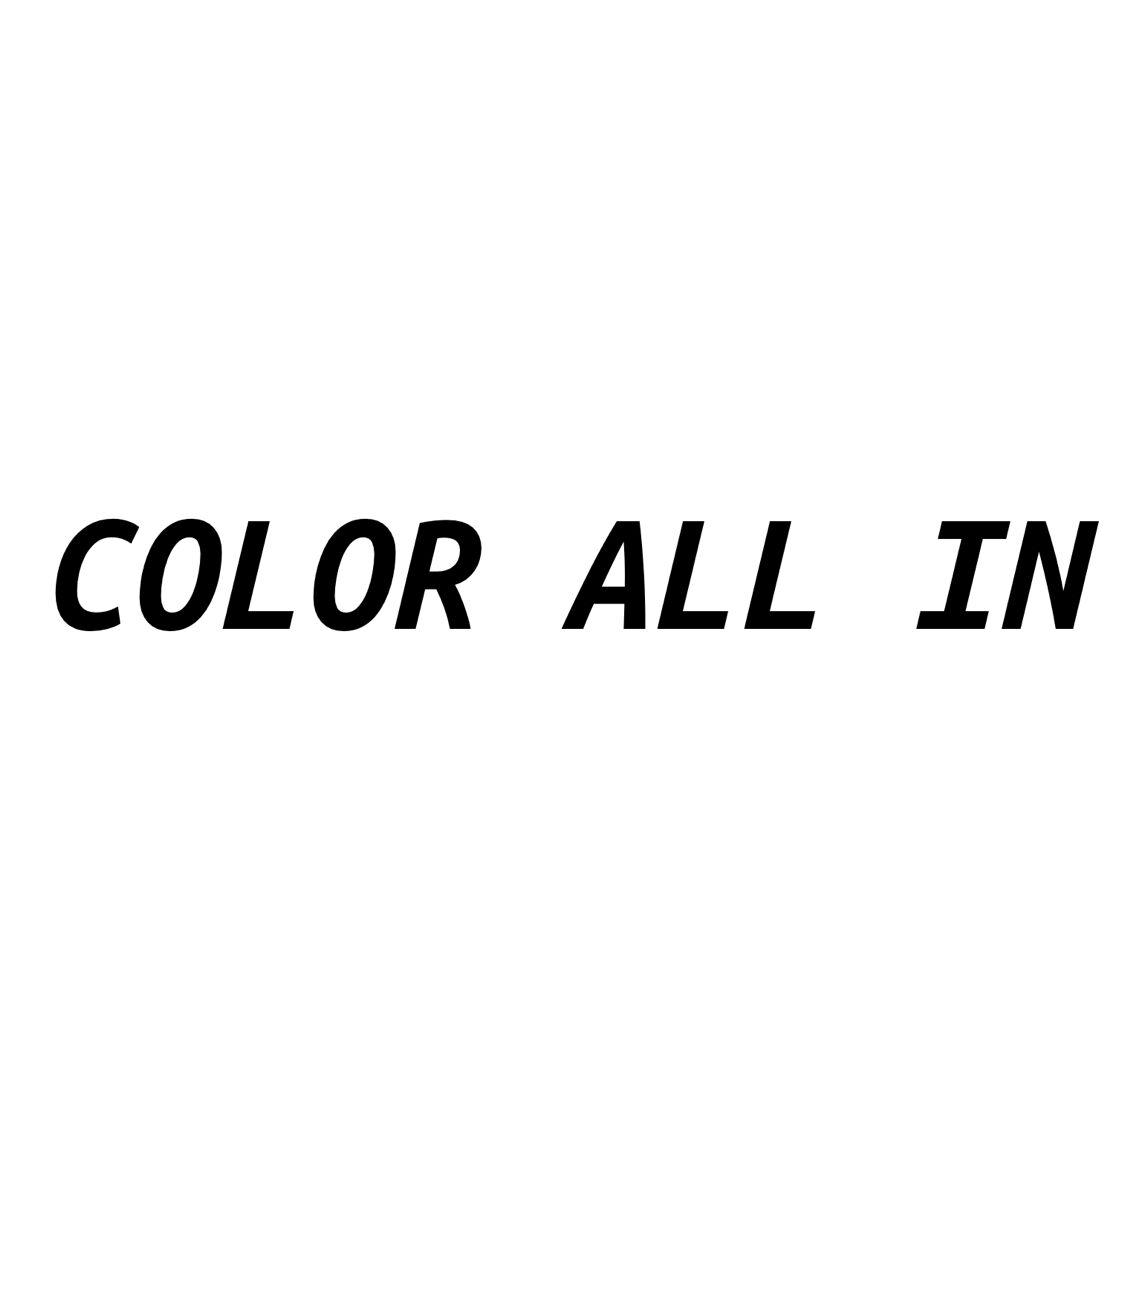 COLOR ALL IN